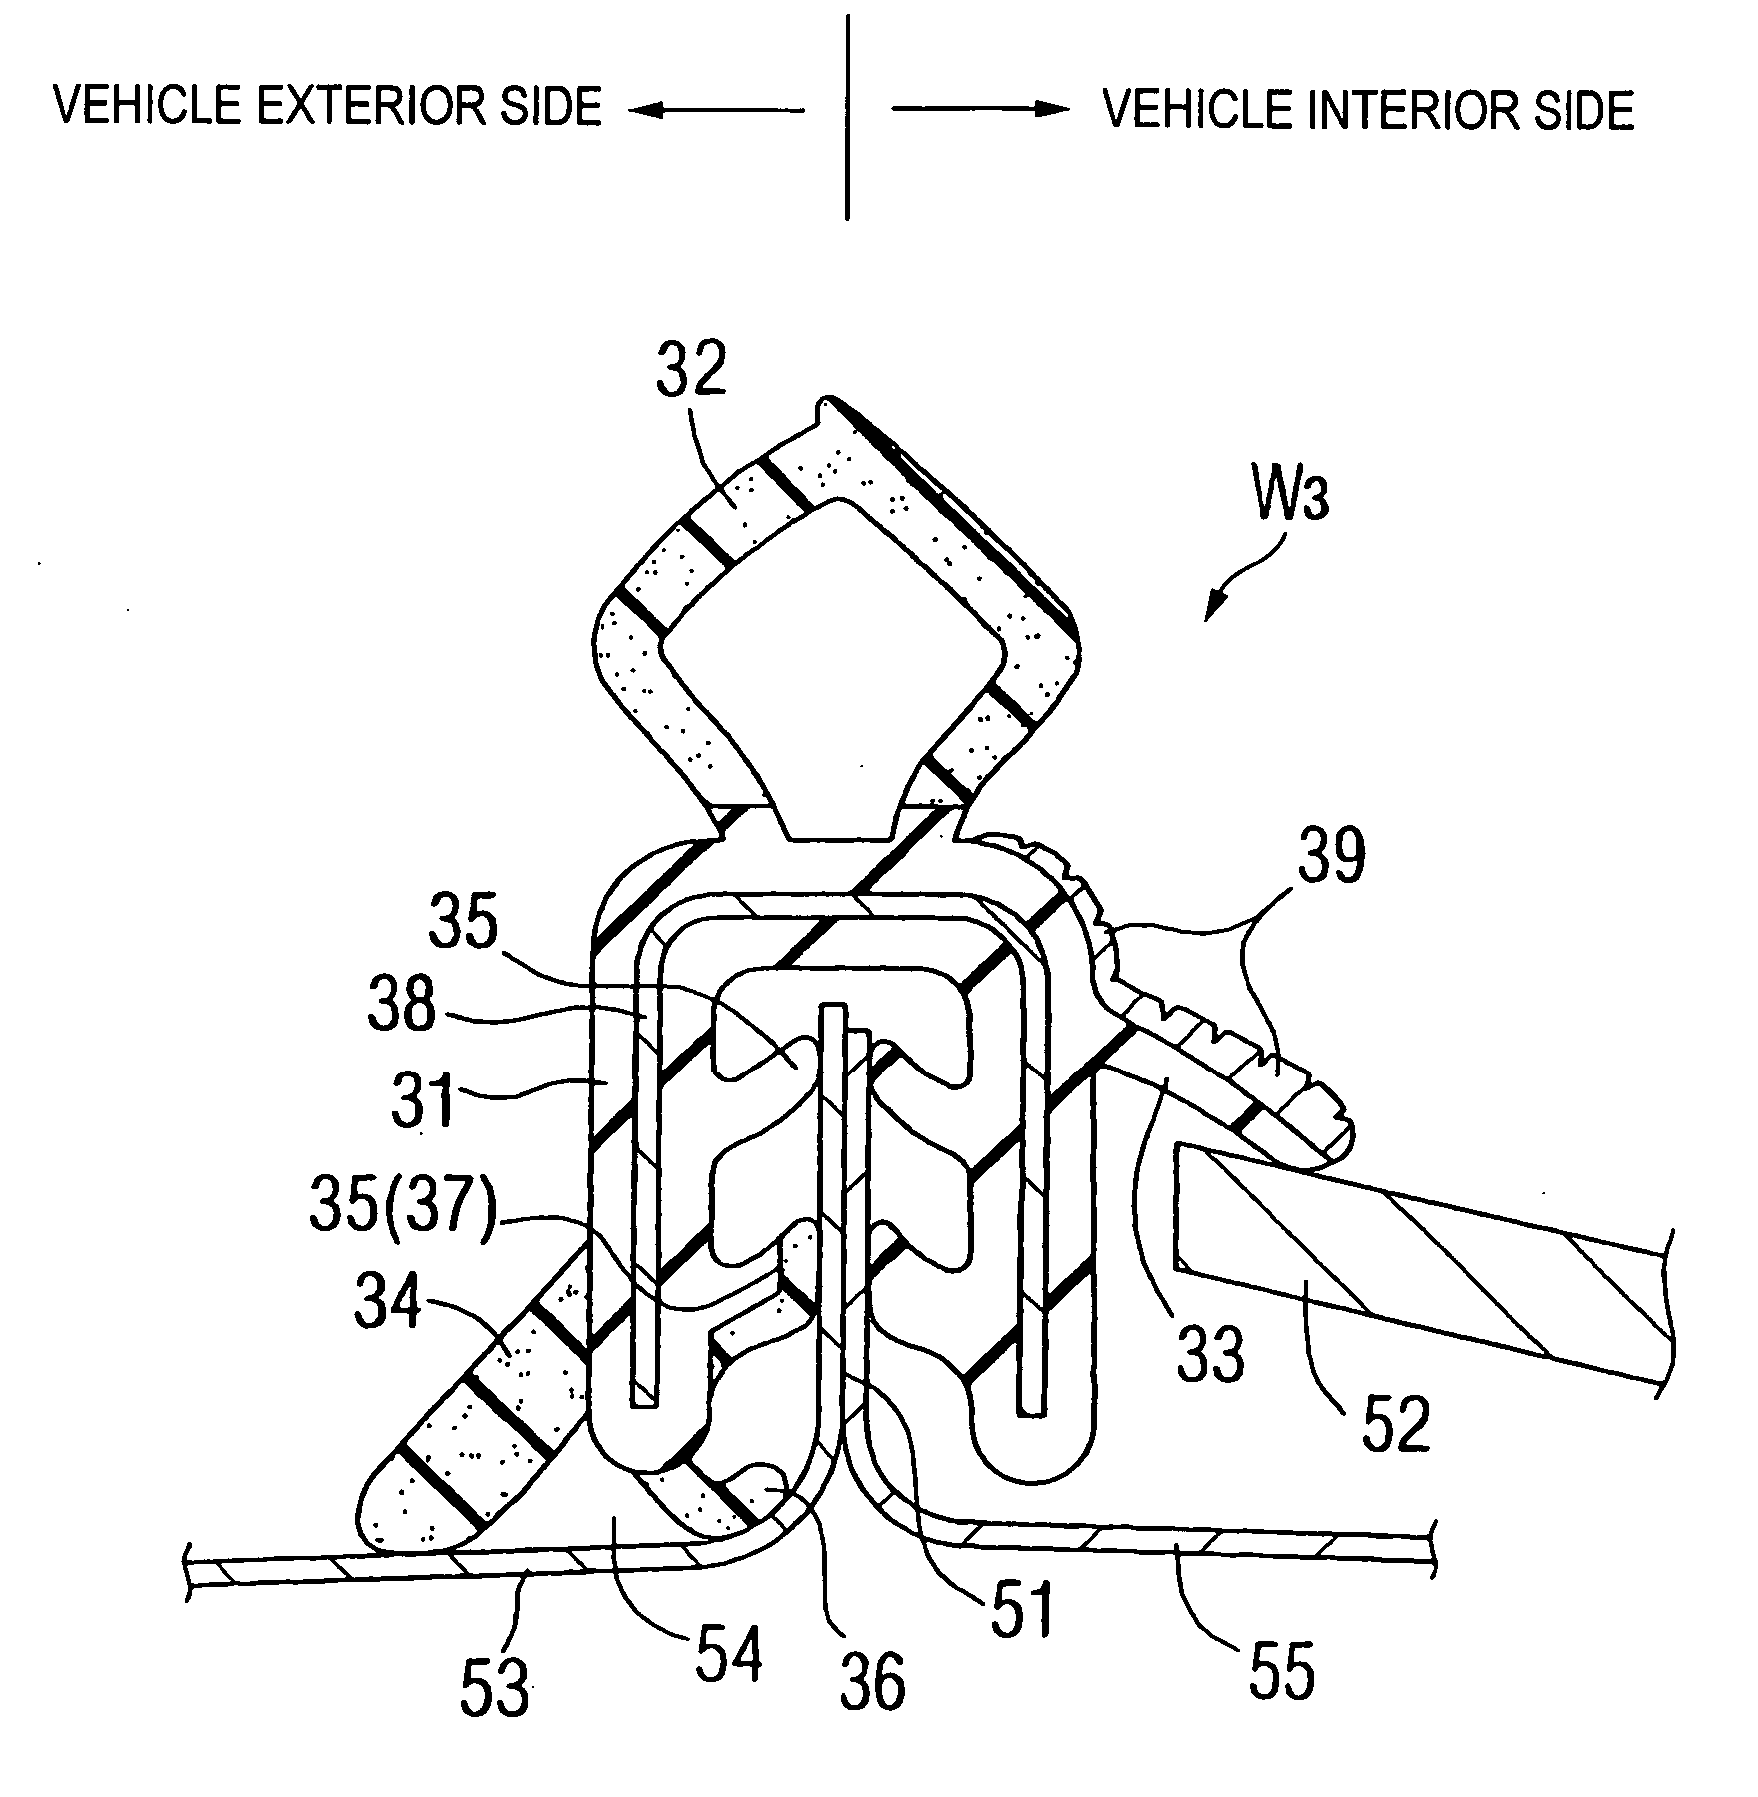 Long ornament member and method for manufacturing the same